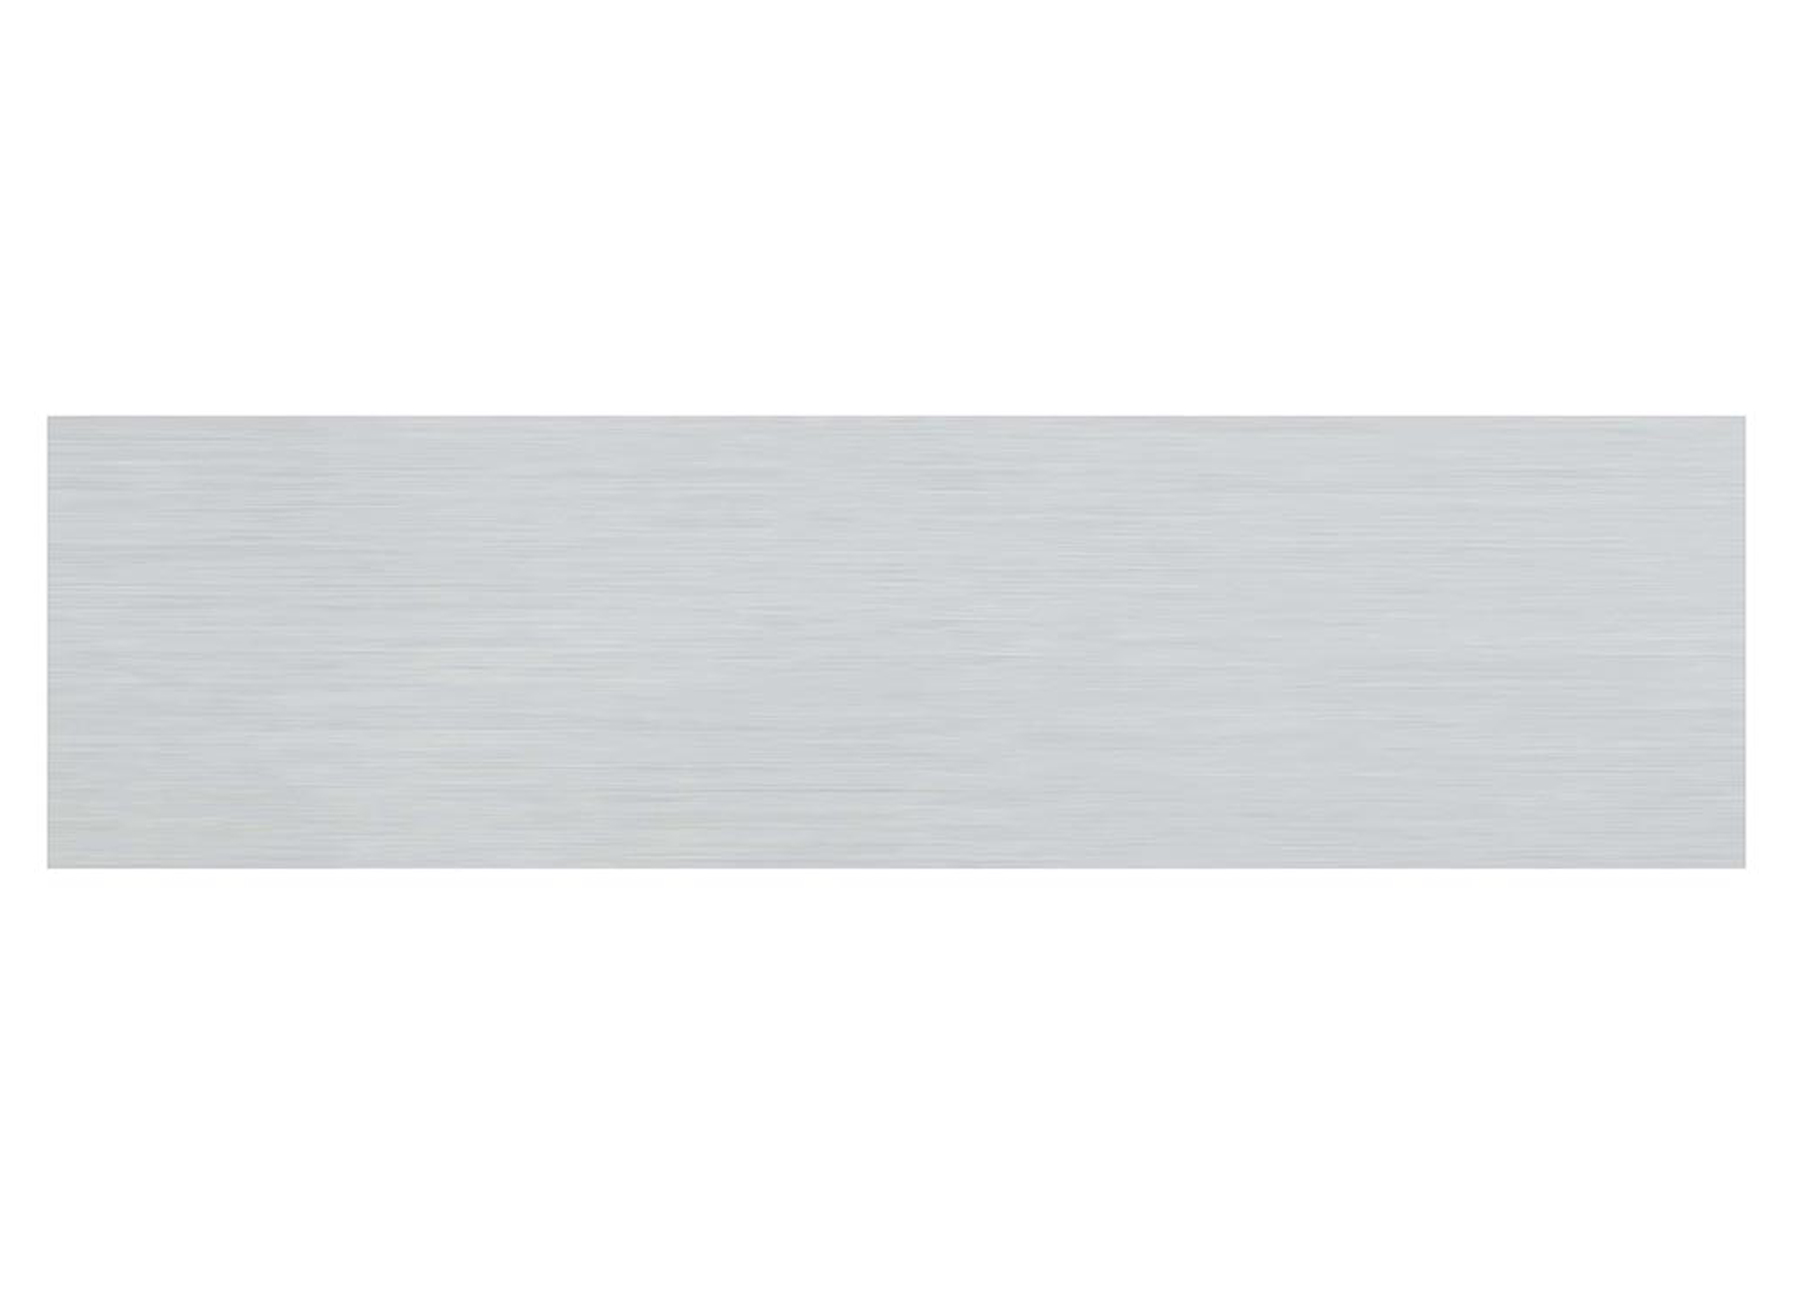 ROUTE ALULOOK 165X44 MM BLANCO